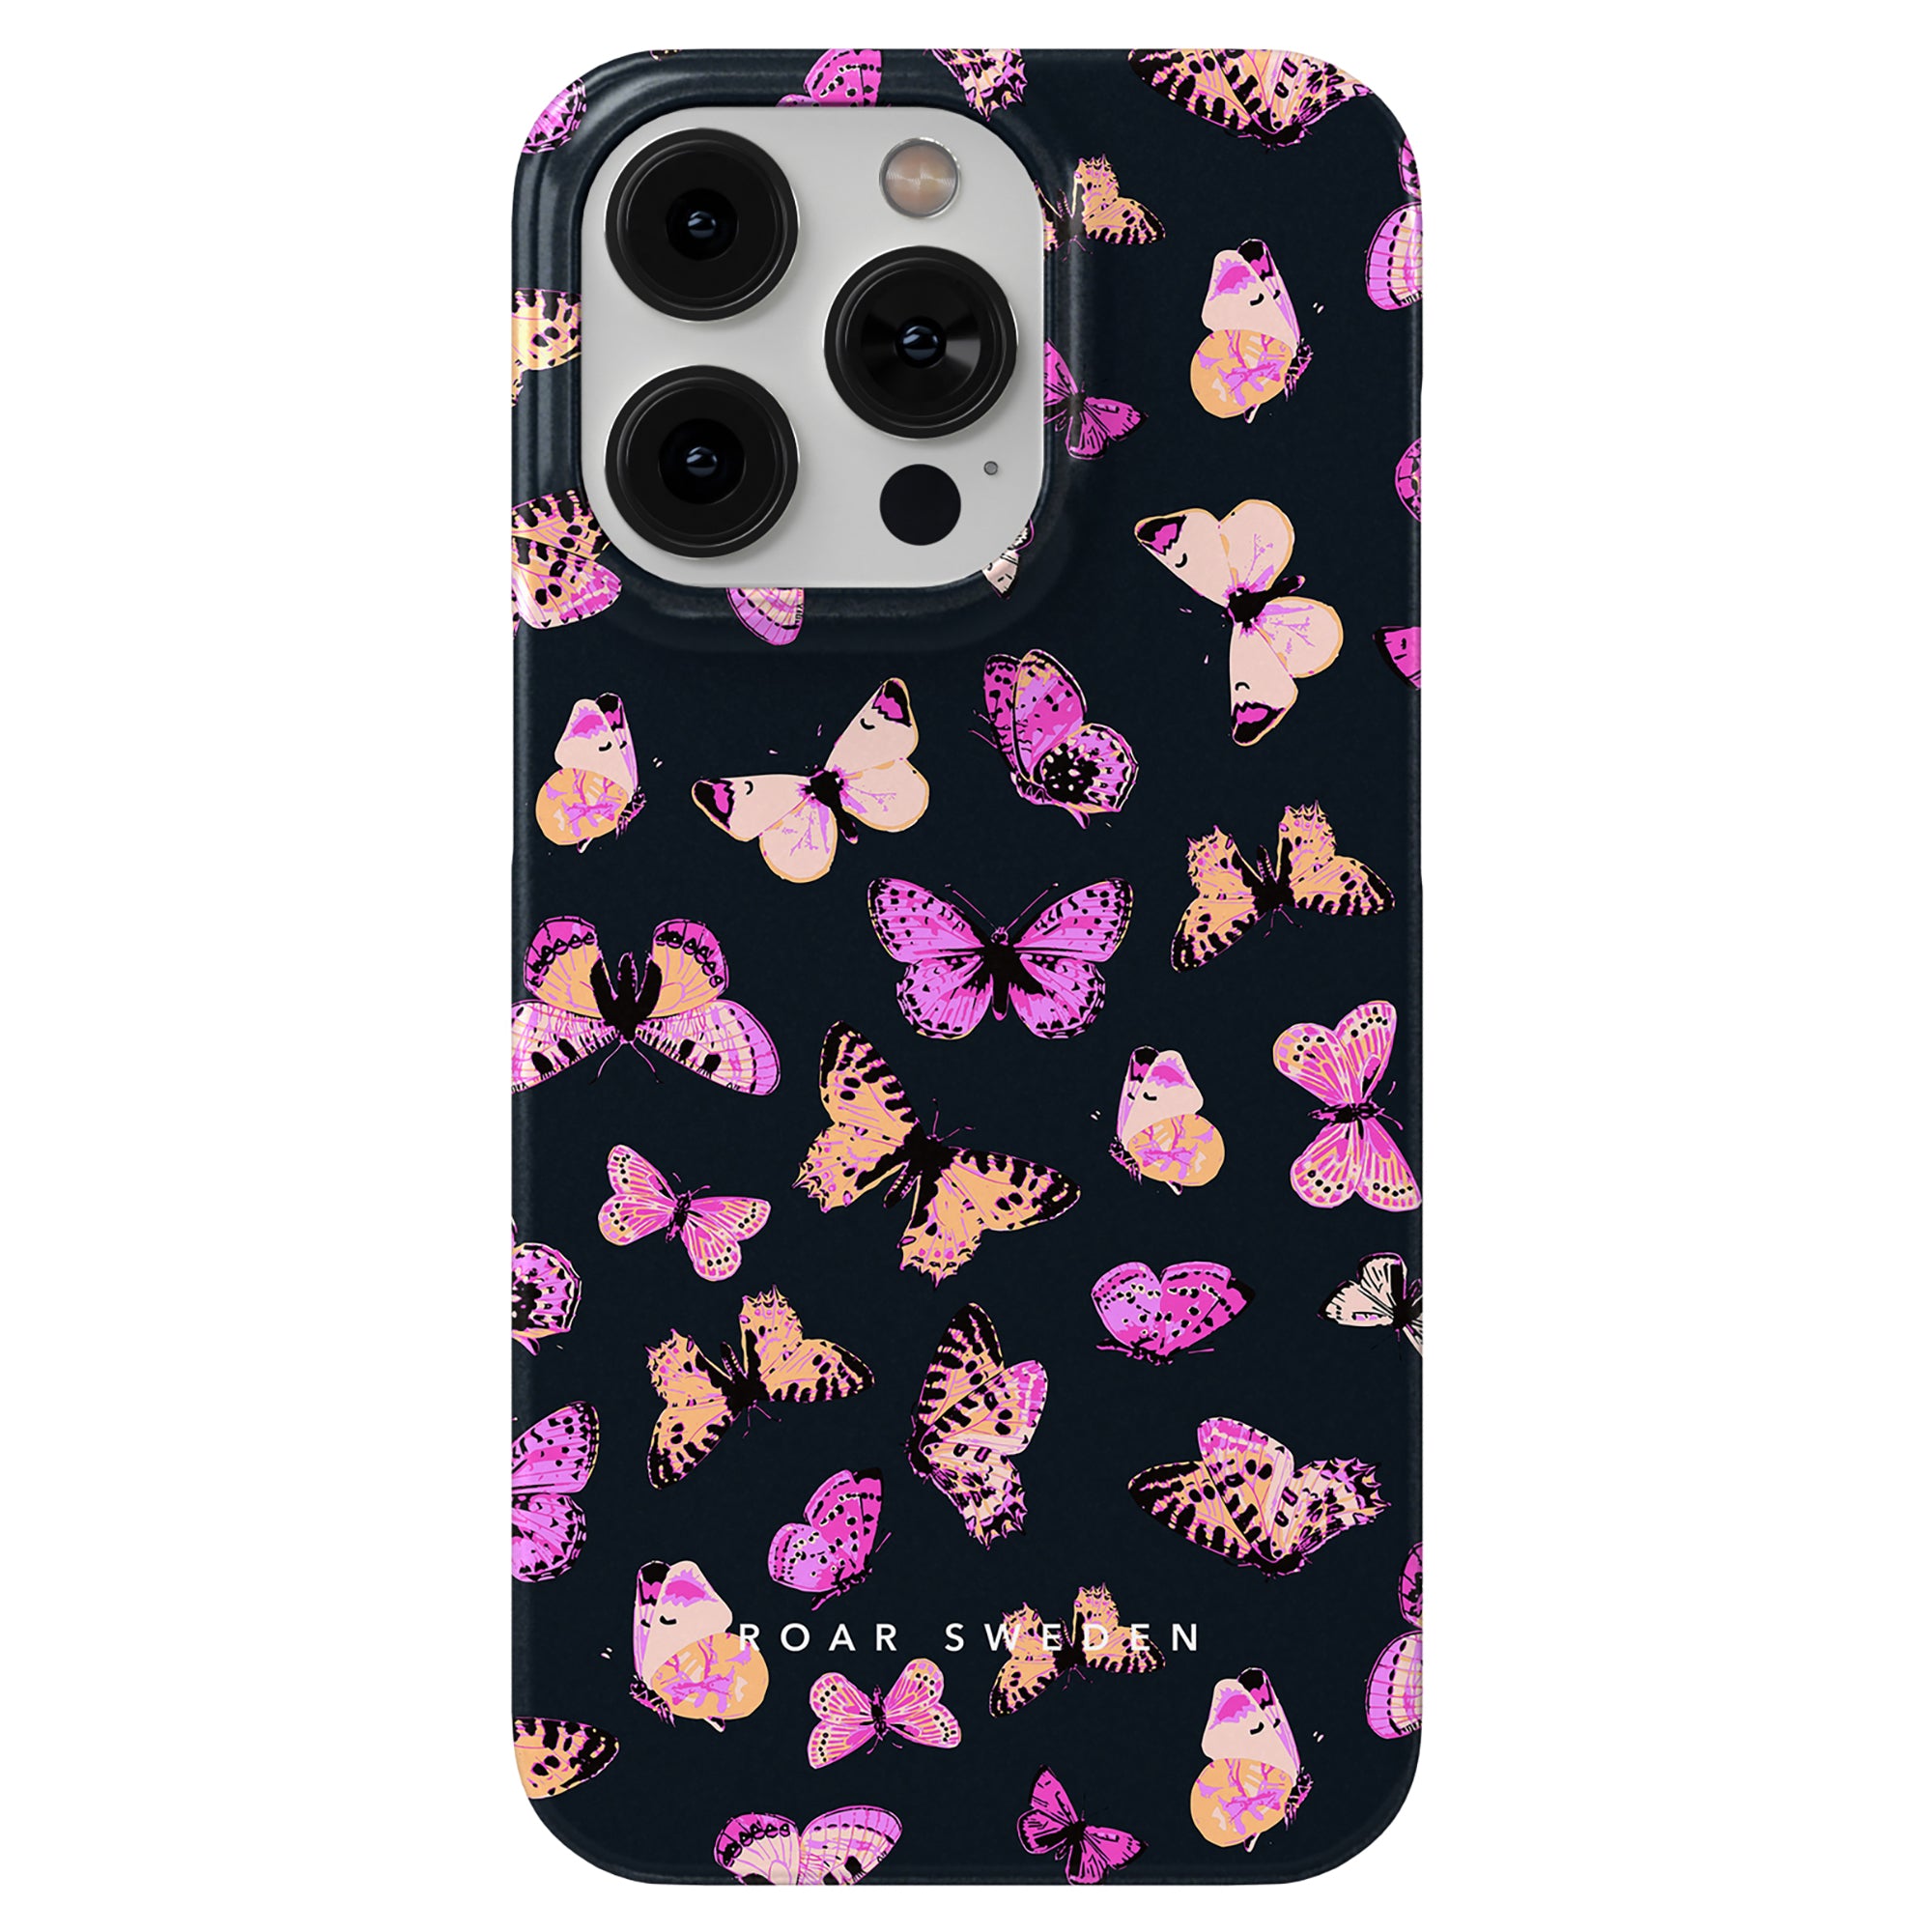 A smartphone case with a black background and a Pink Butterflies pattern, offering a relaxed fit.